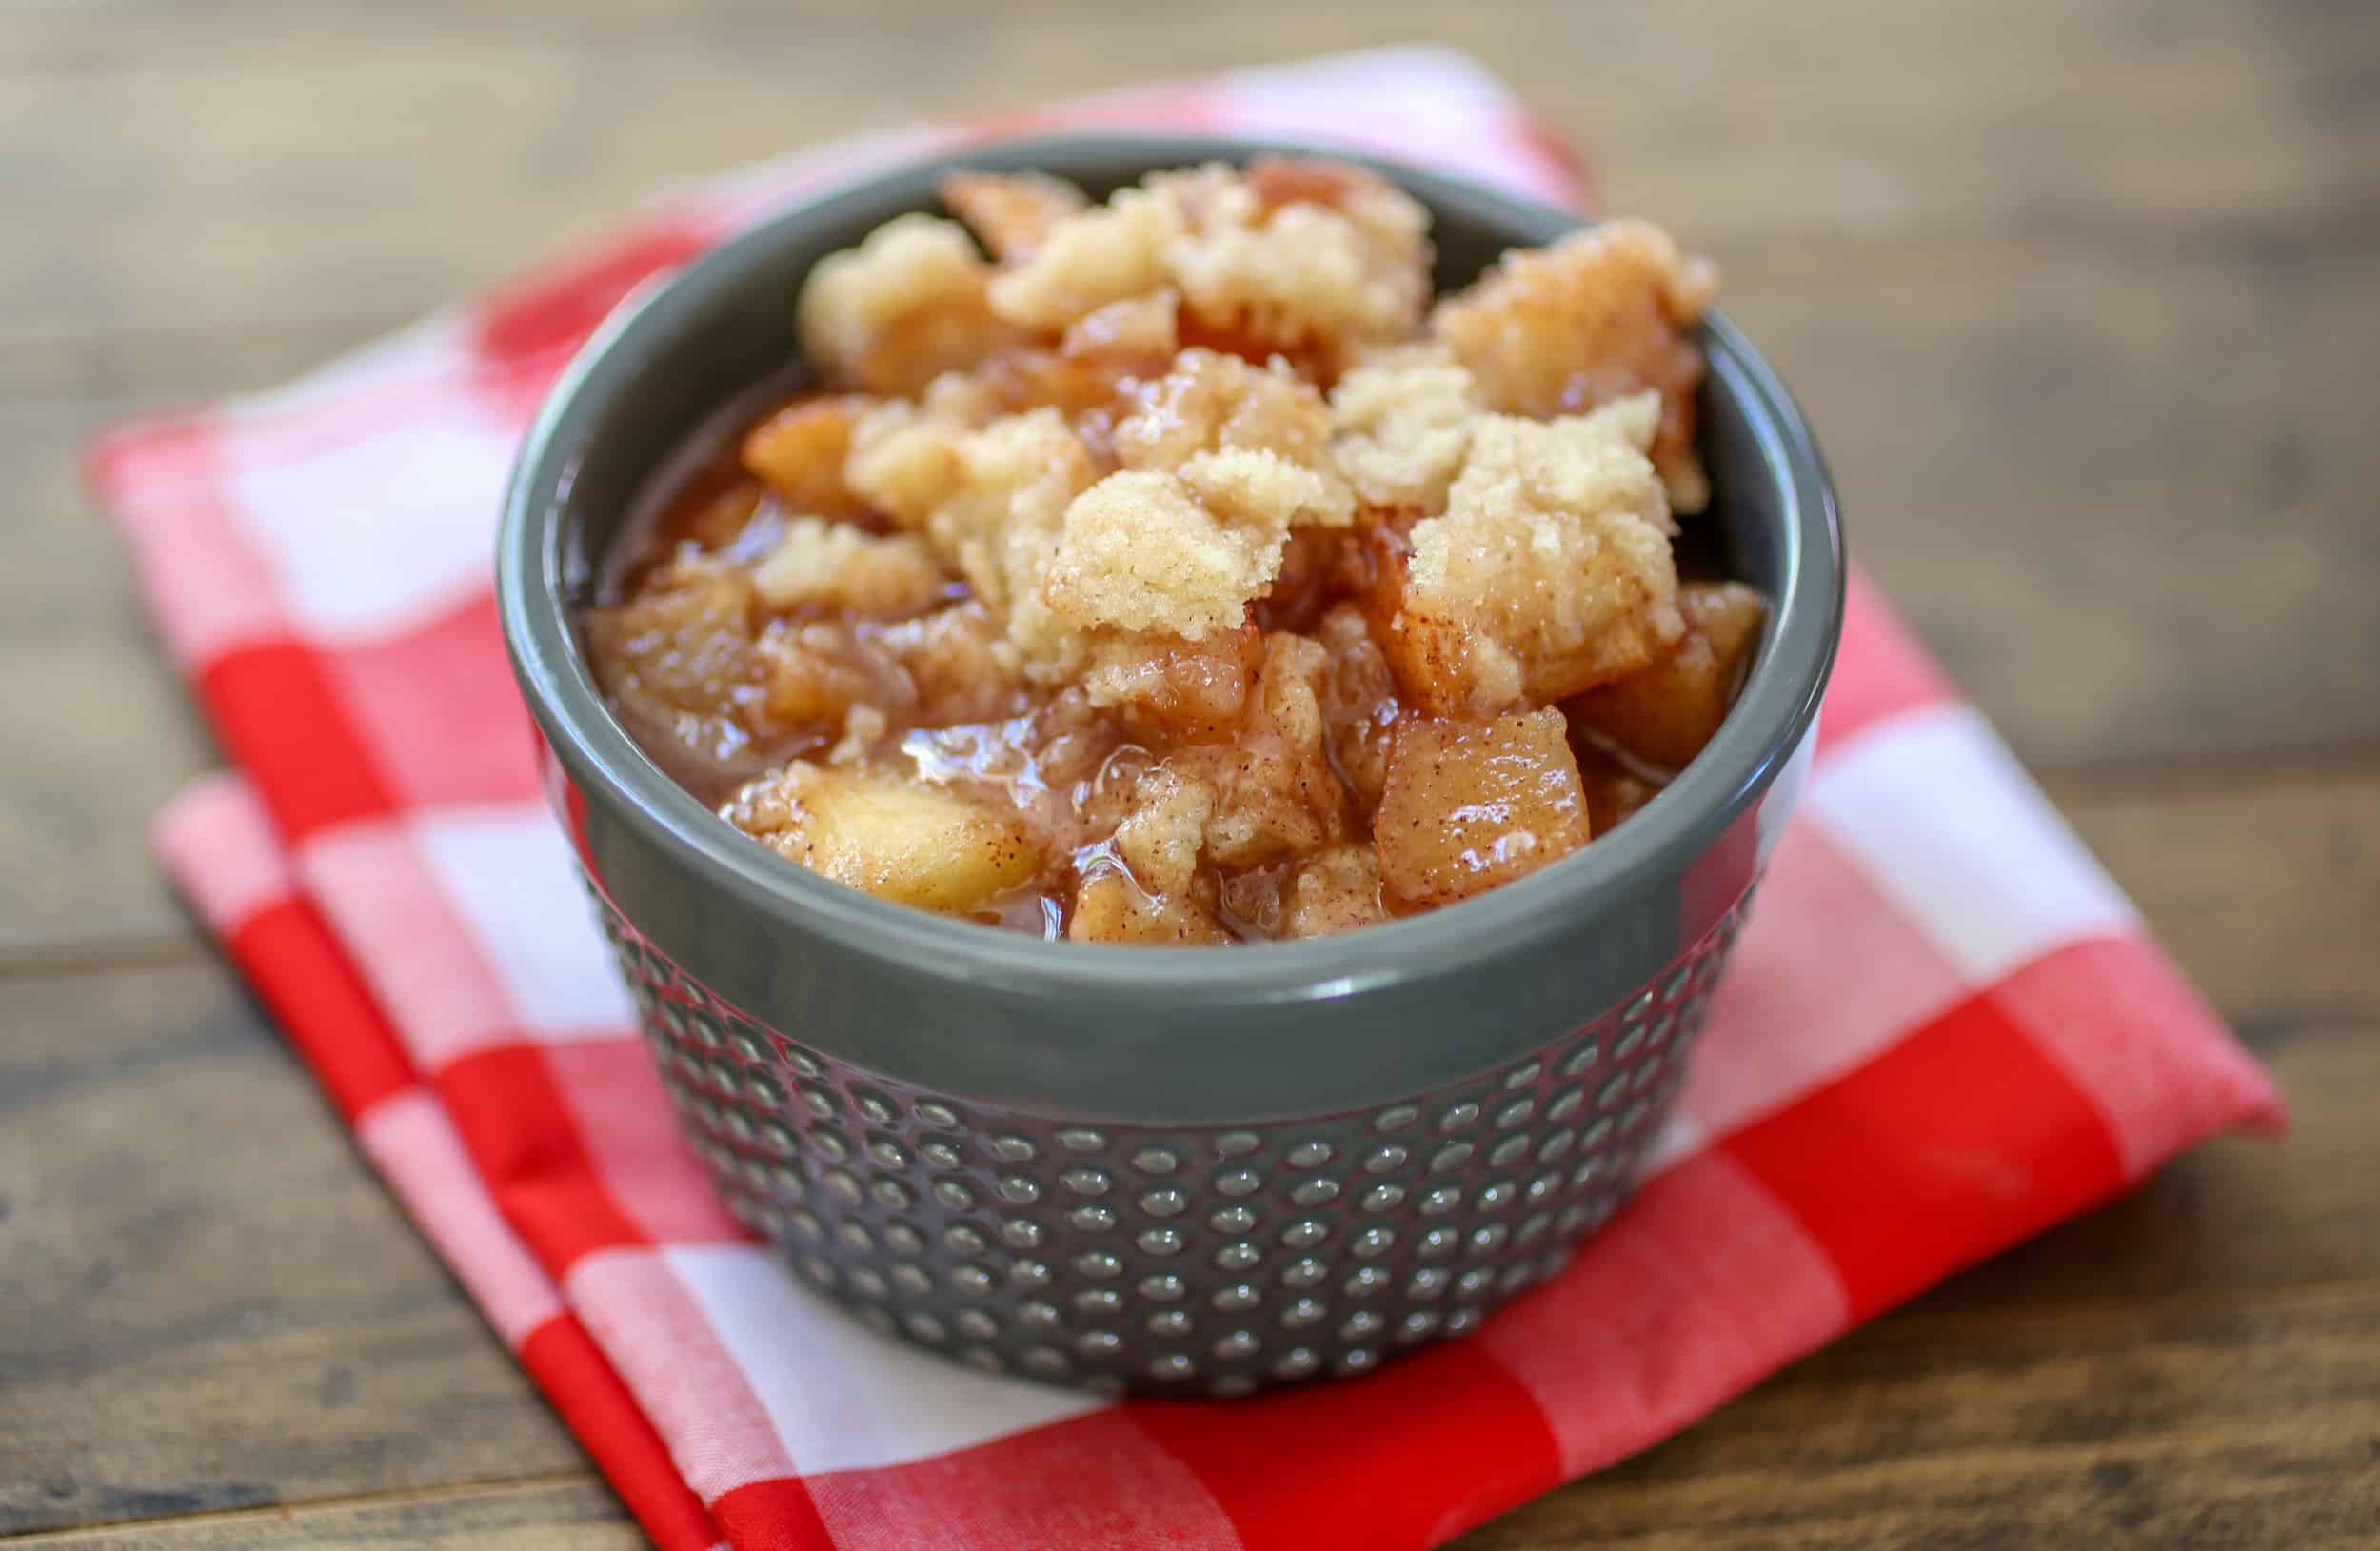 Maple Apple Crisp - An easy apple crisp with the addition of maple syrup to add a delicious layer of flavor!